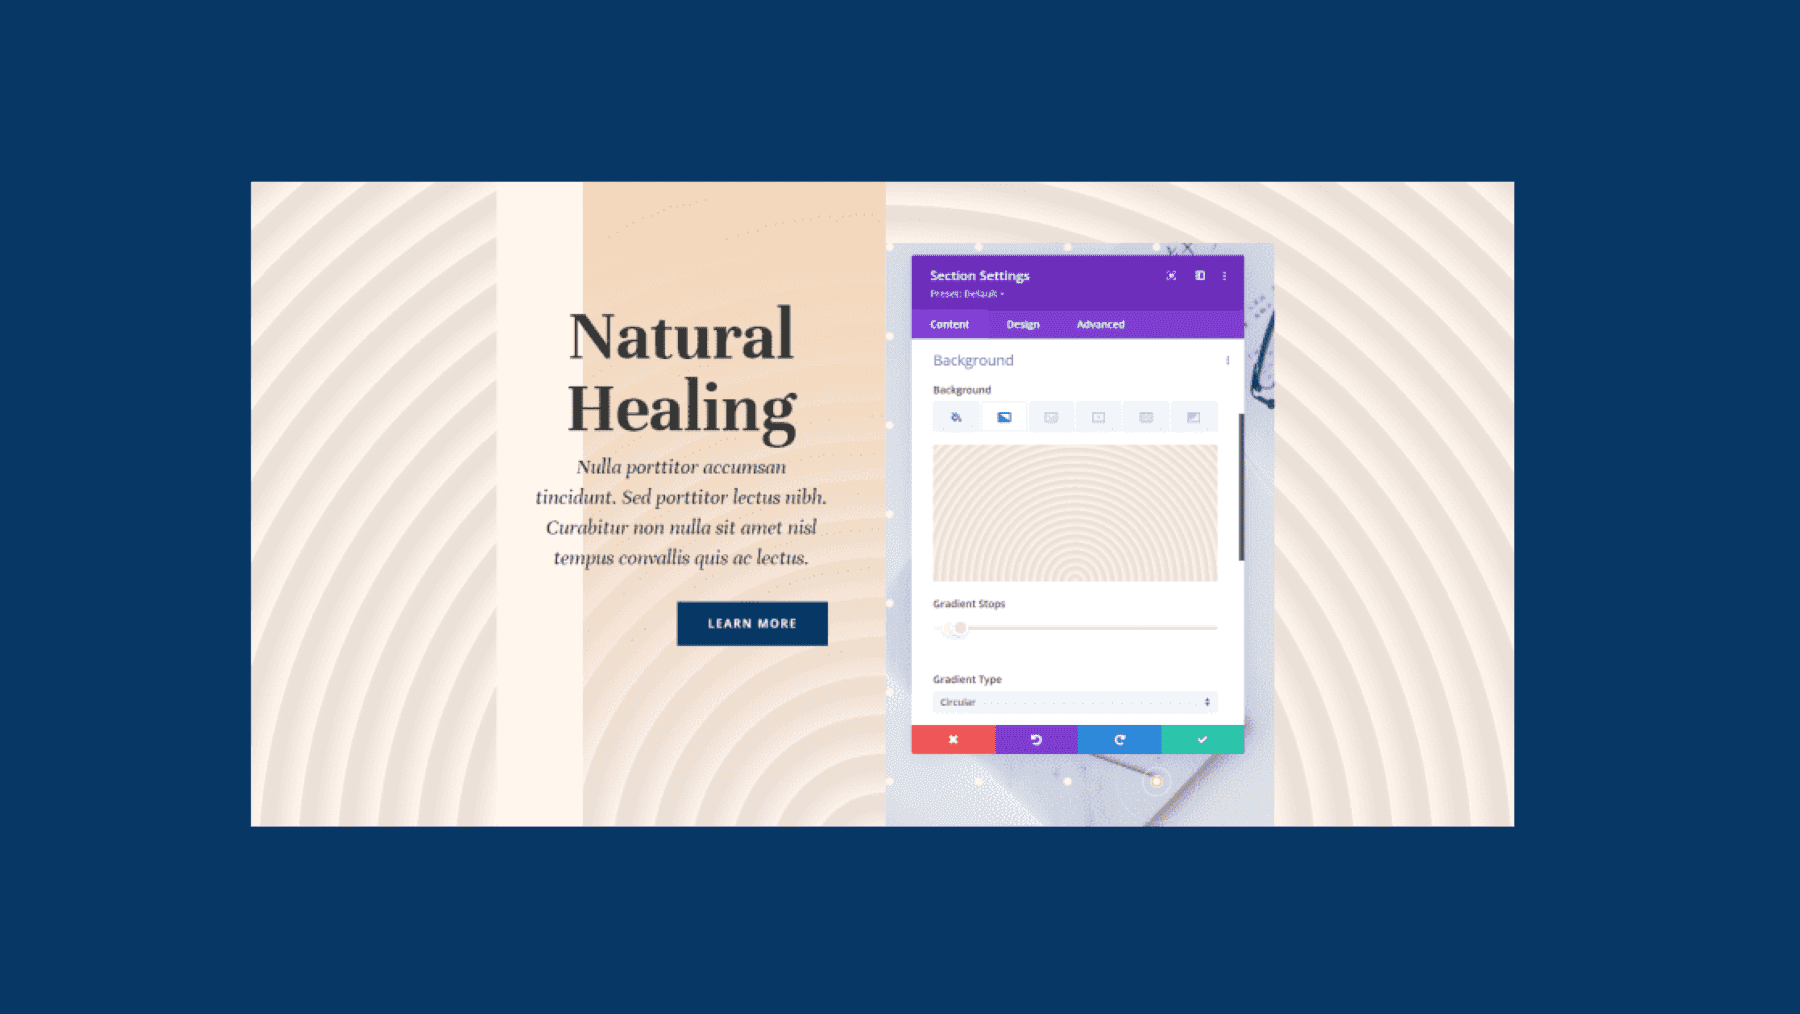 How to use Divi's gradient repeat option to create custom background patterns